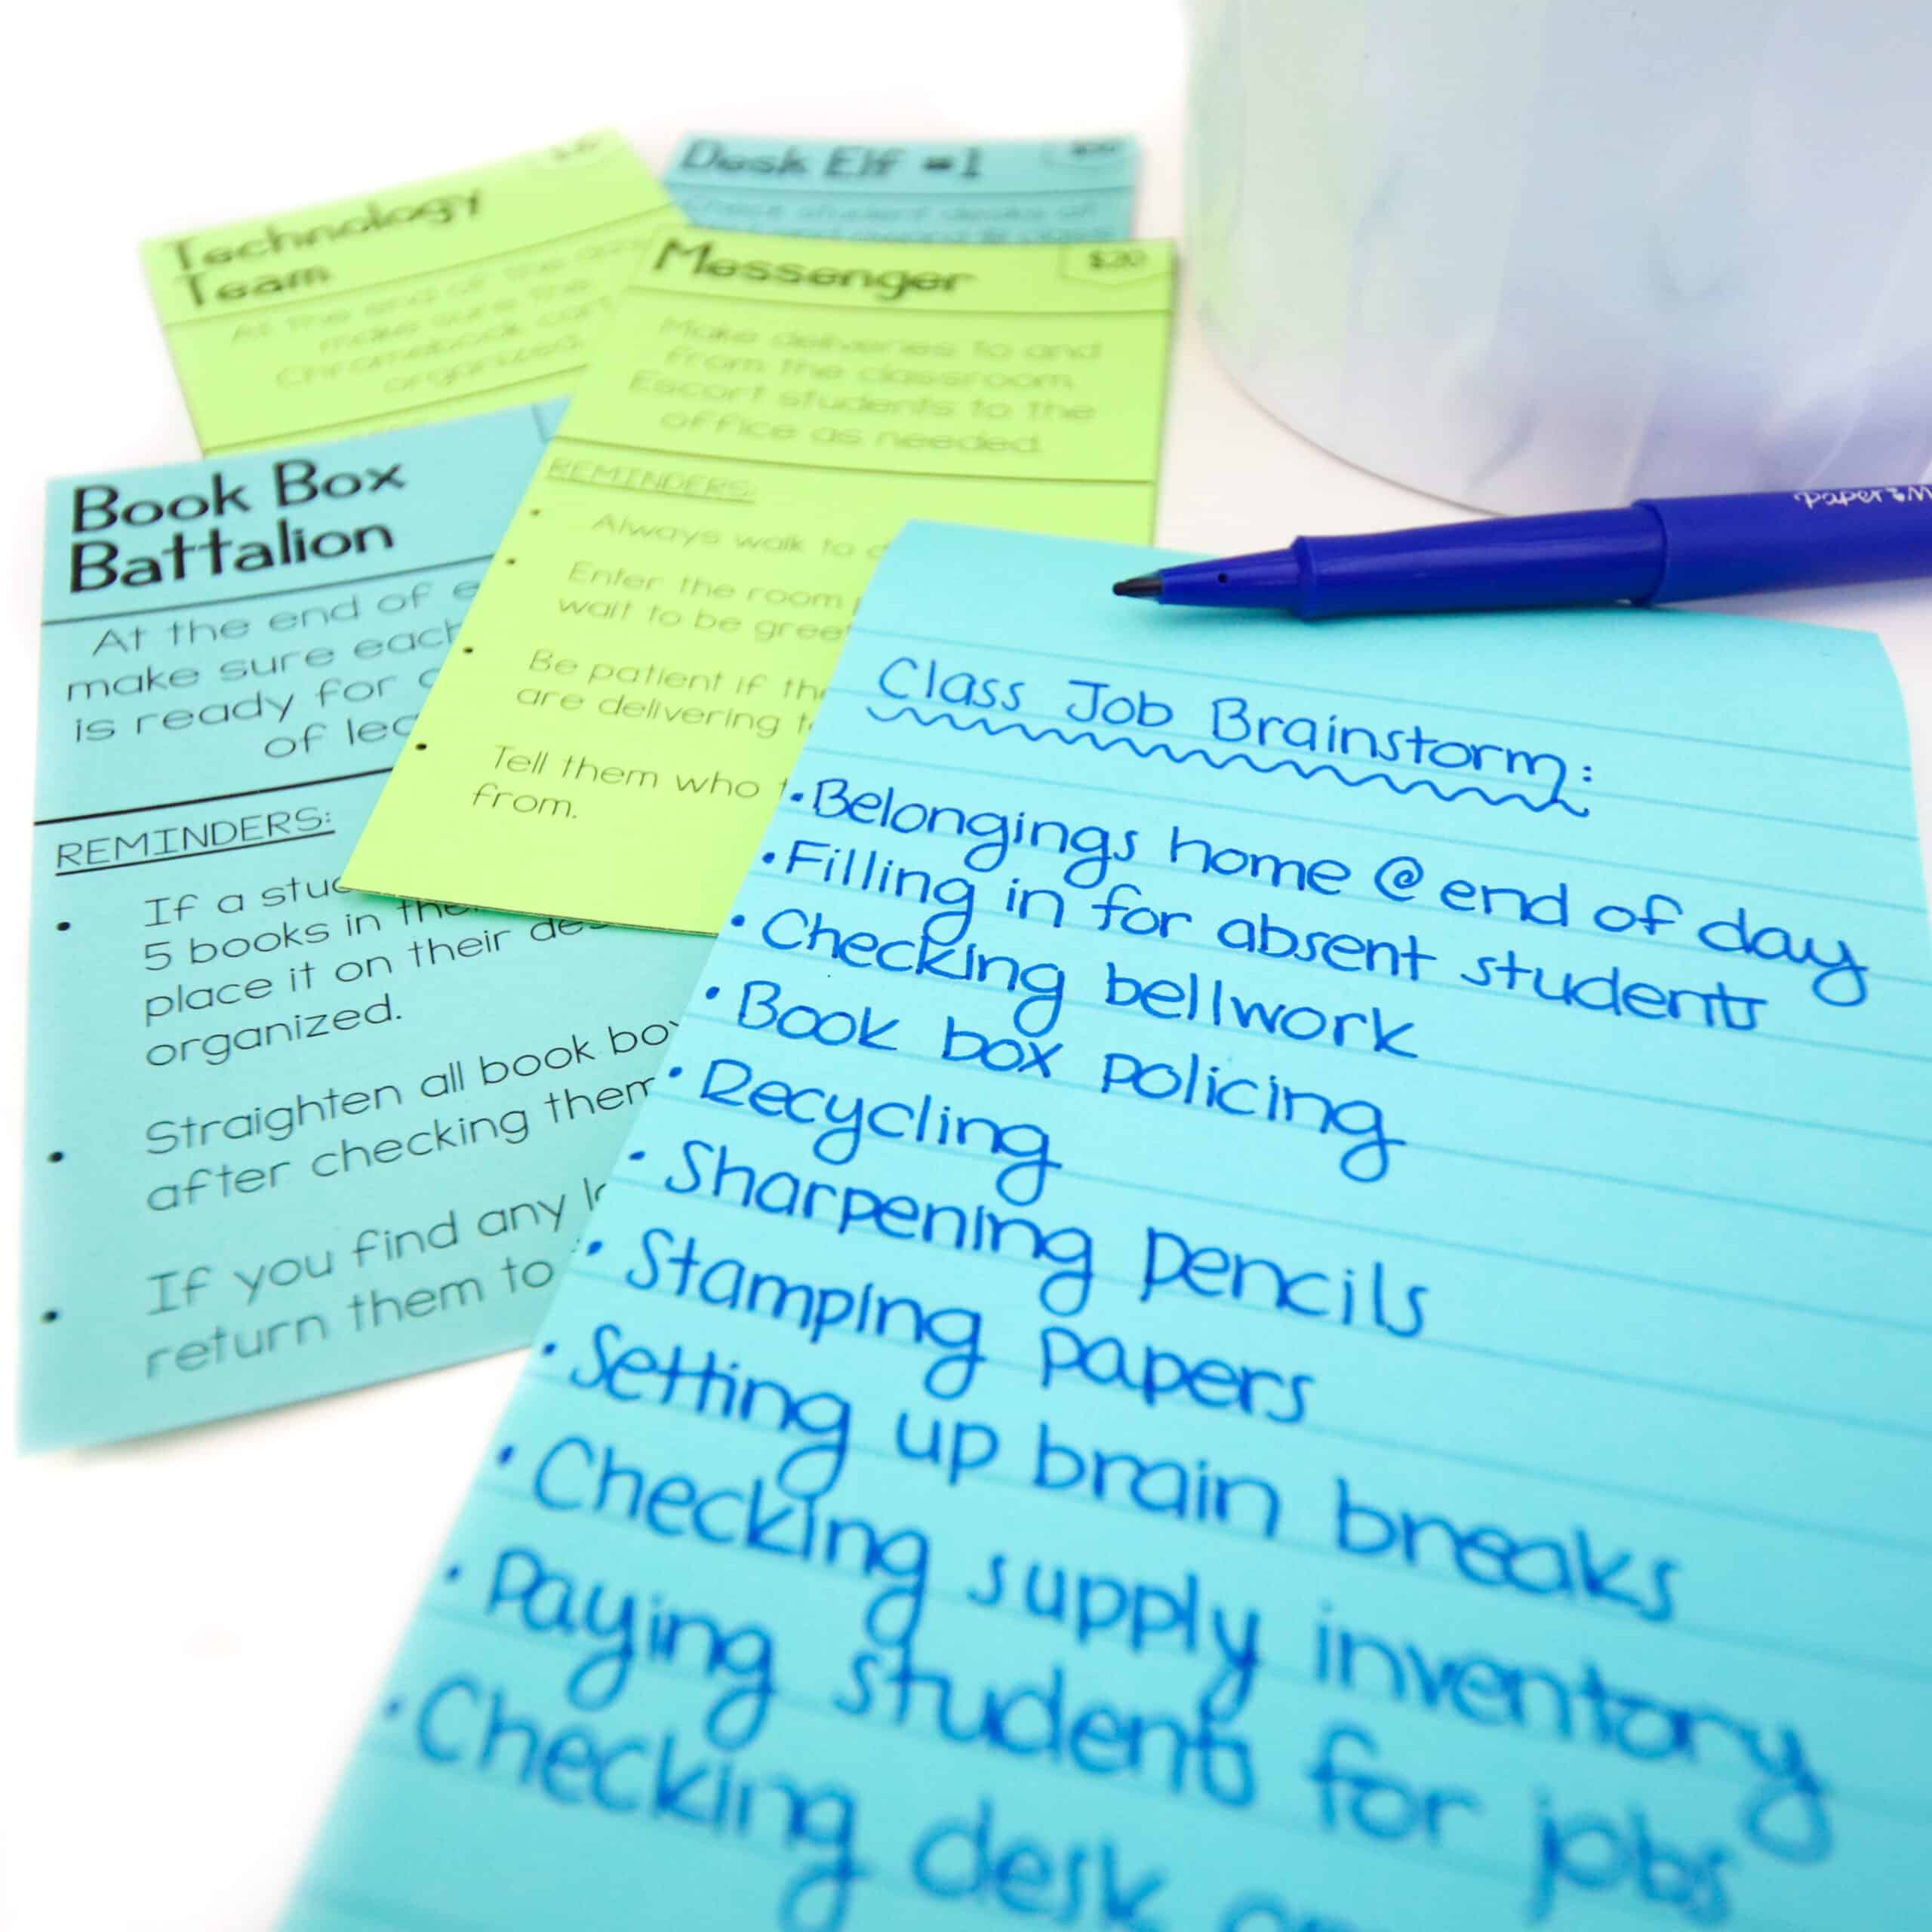 Classroom job brainstorming is written on a blue post it note next to a collection of classroom job cards. 